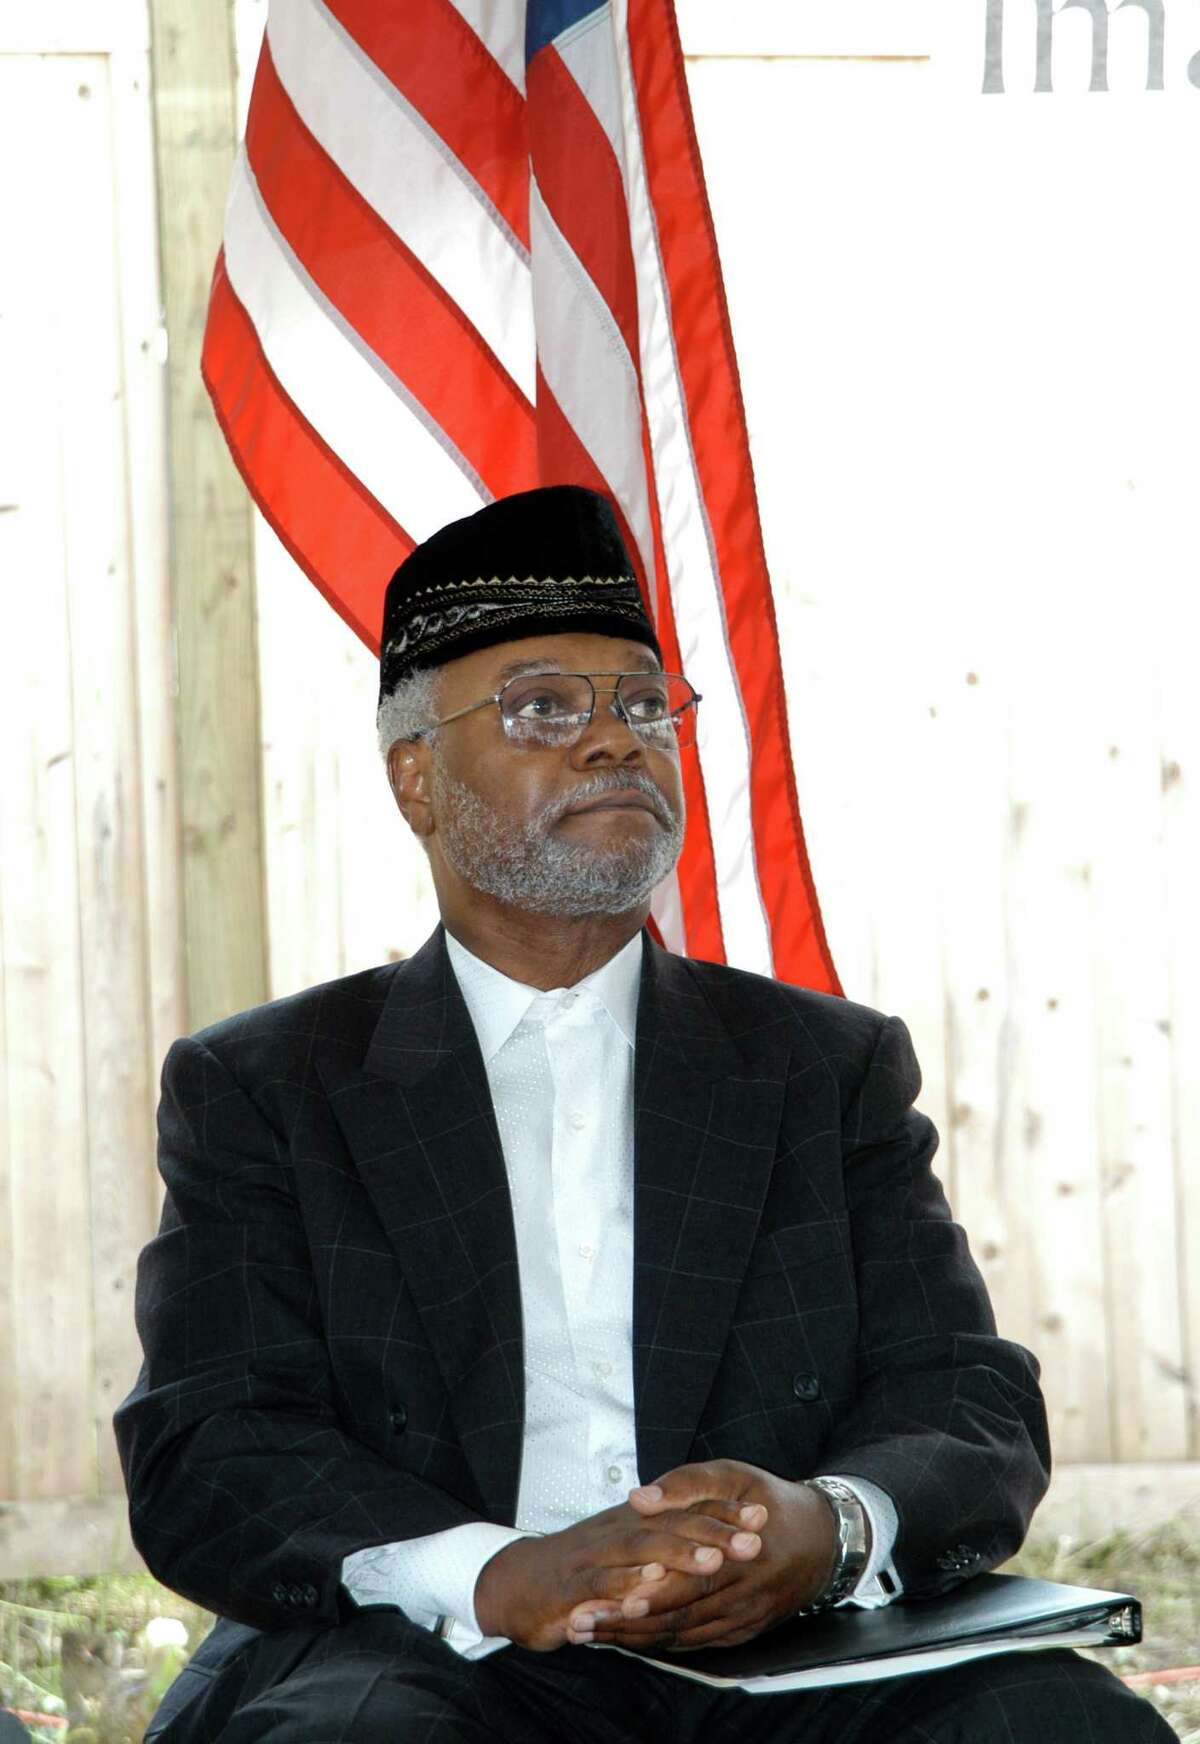 Imam Abdul-Majid Karim Hasan listens to speakers honoring him at a special ceremony at his Hamden mosque in 2004.